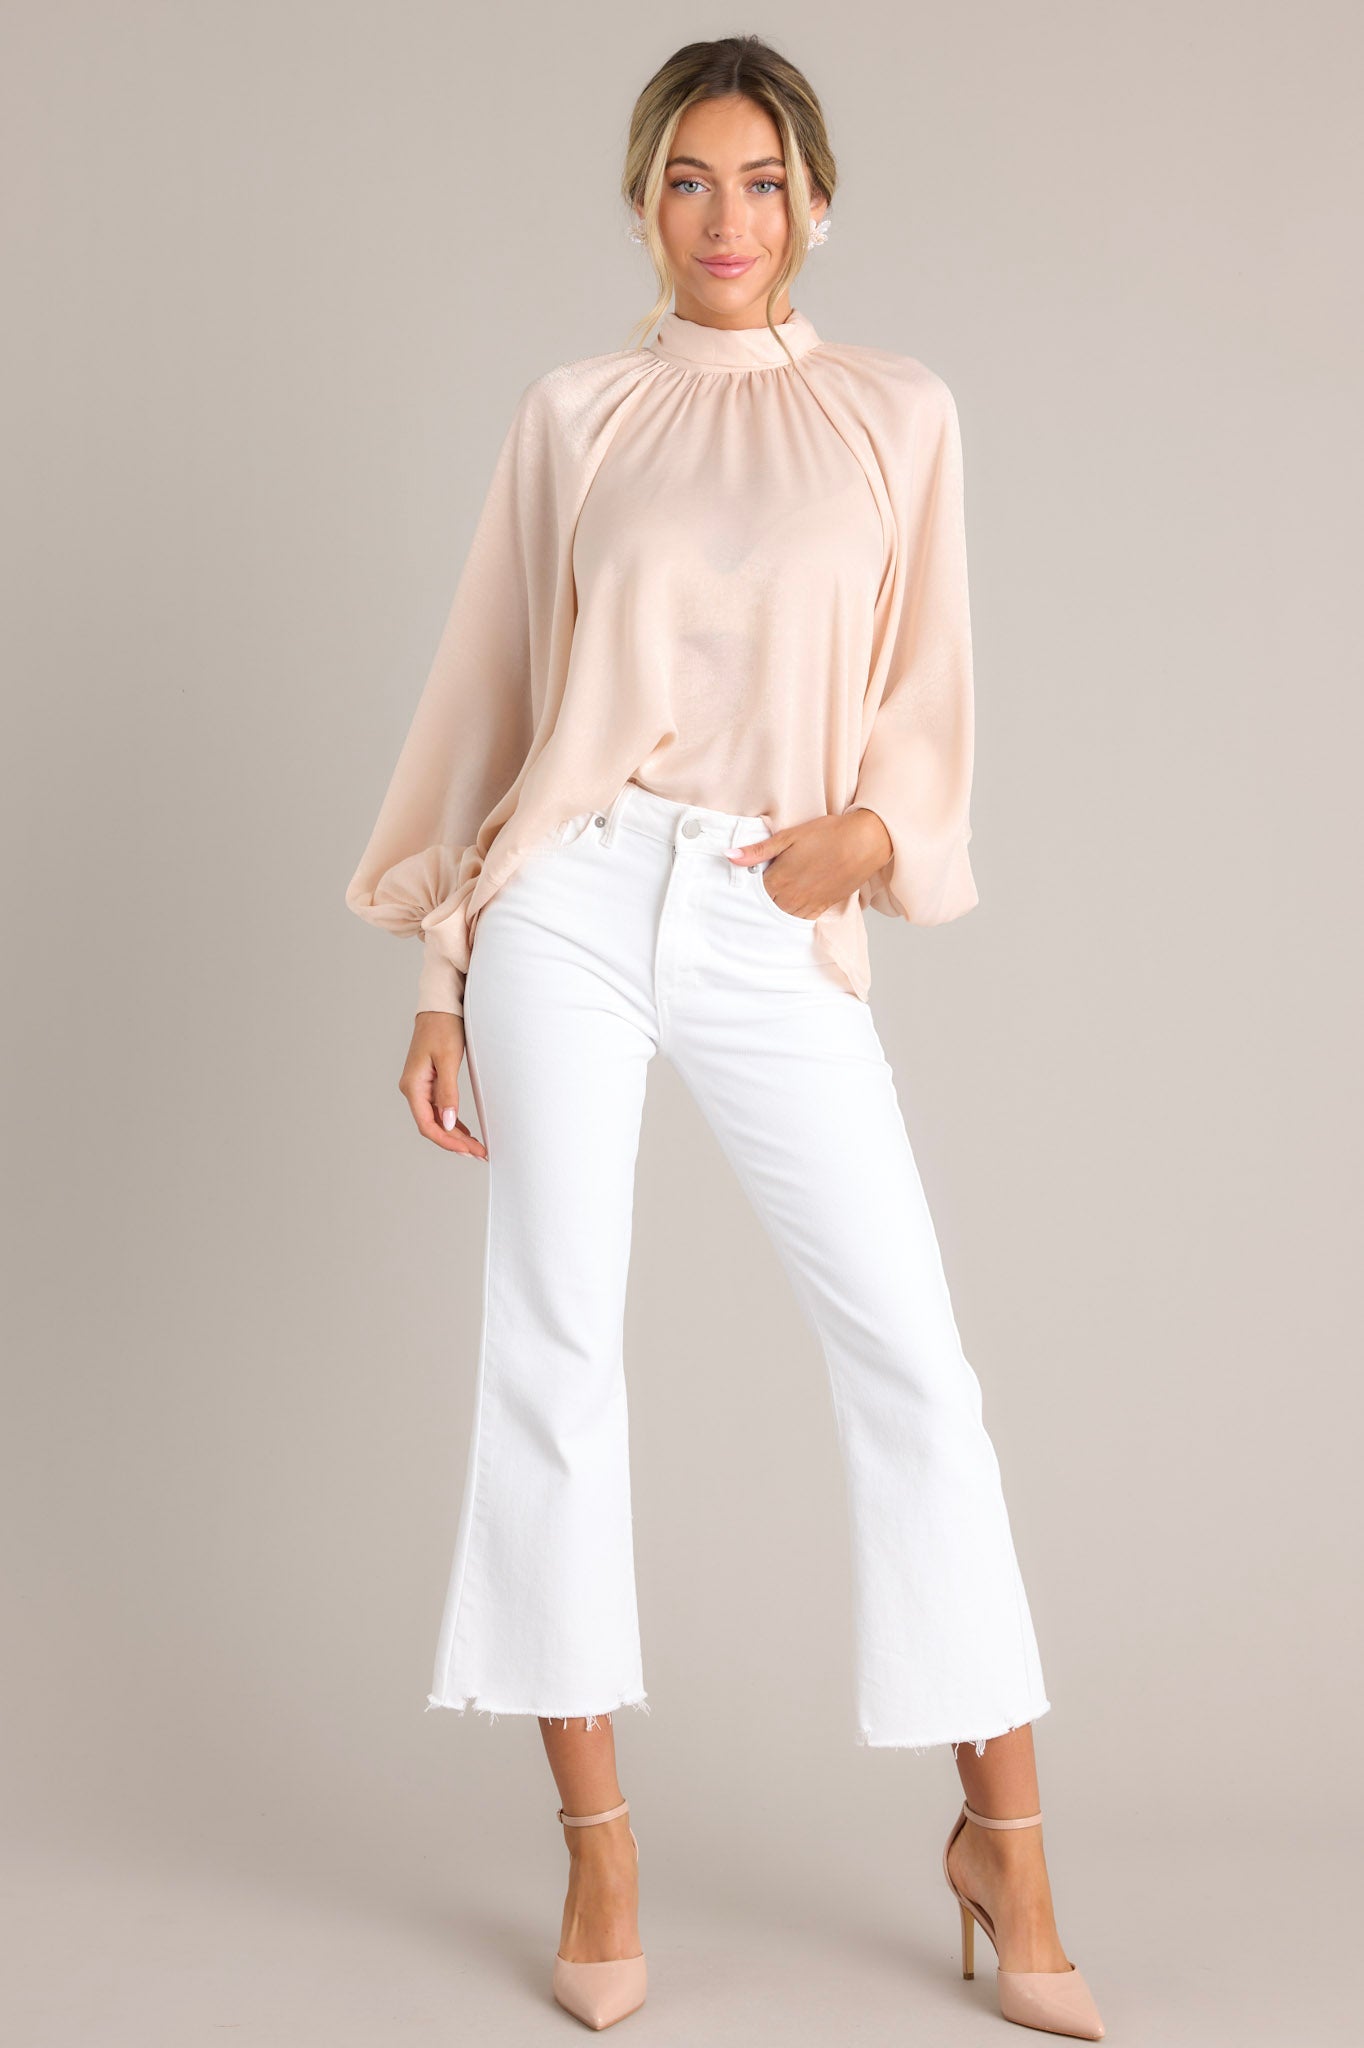 World Class Blush Pink Bow Tie Blouse